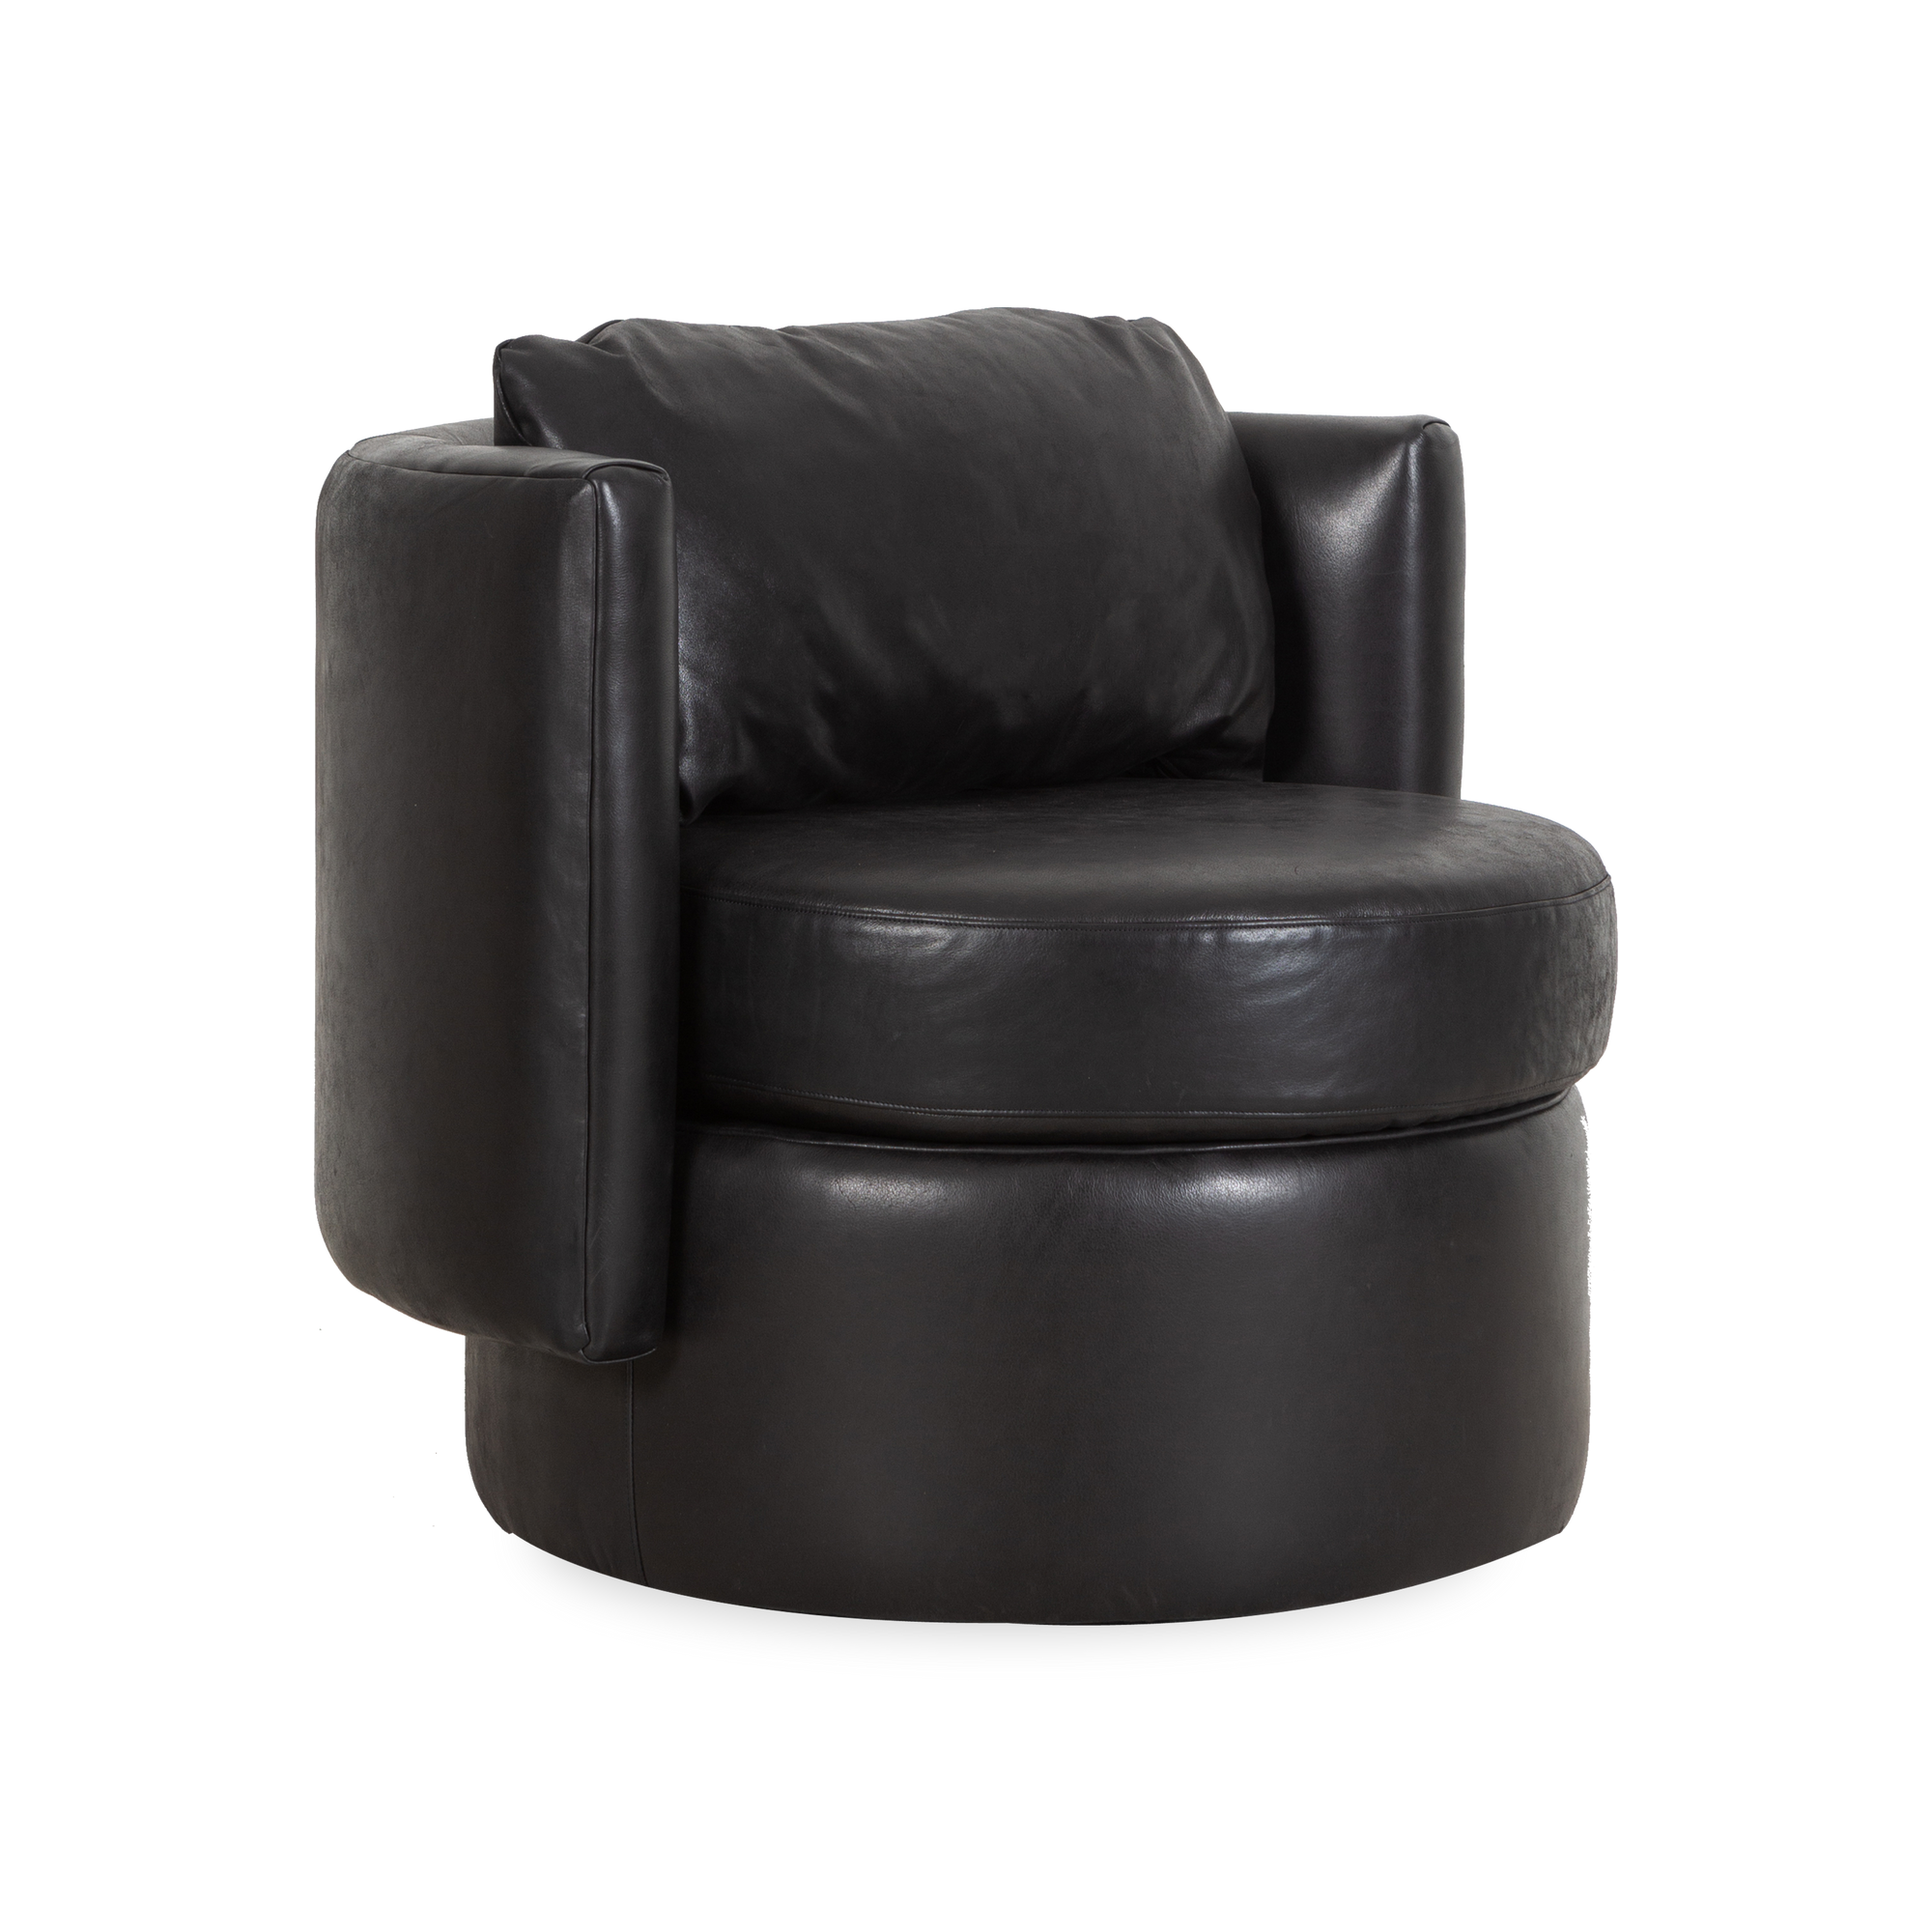 Sculptural and soft, the Artemis Swivel Chair will add an artful touch to your space.